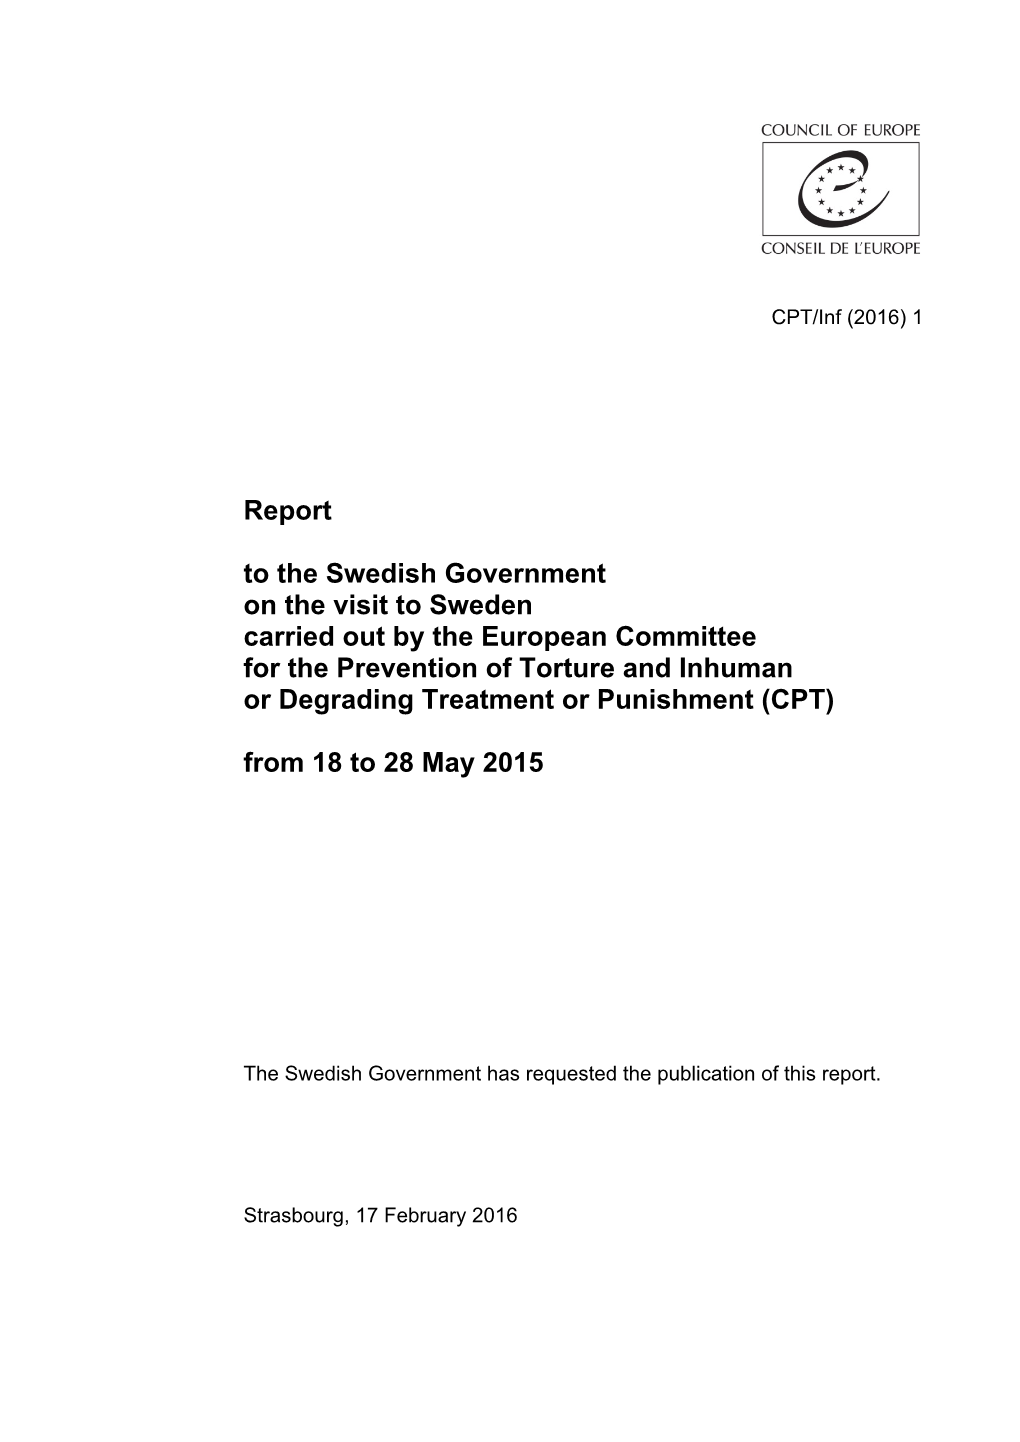 Report to the Swedish Government on the Visit to Sweden Carried out By